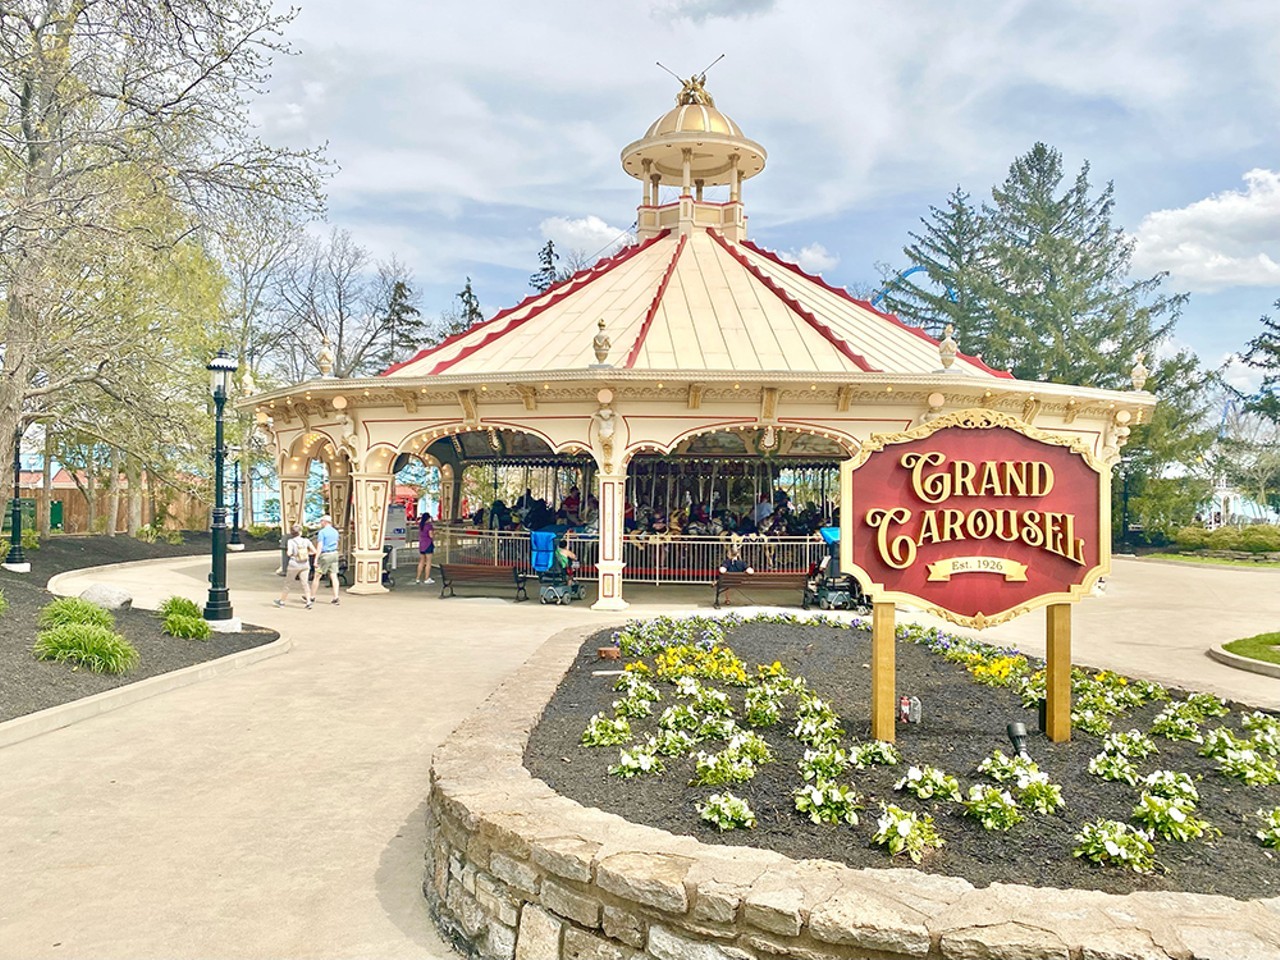 Grand Carousel
Built in 1926 and originally housed at Coney Island, this whimsical ride comes complete with a Wurlitzer Band Organ, which was refurbished for the anniversary and is once again operational.
Photo: Hailey Bollinger